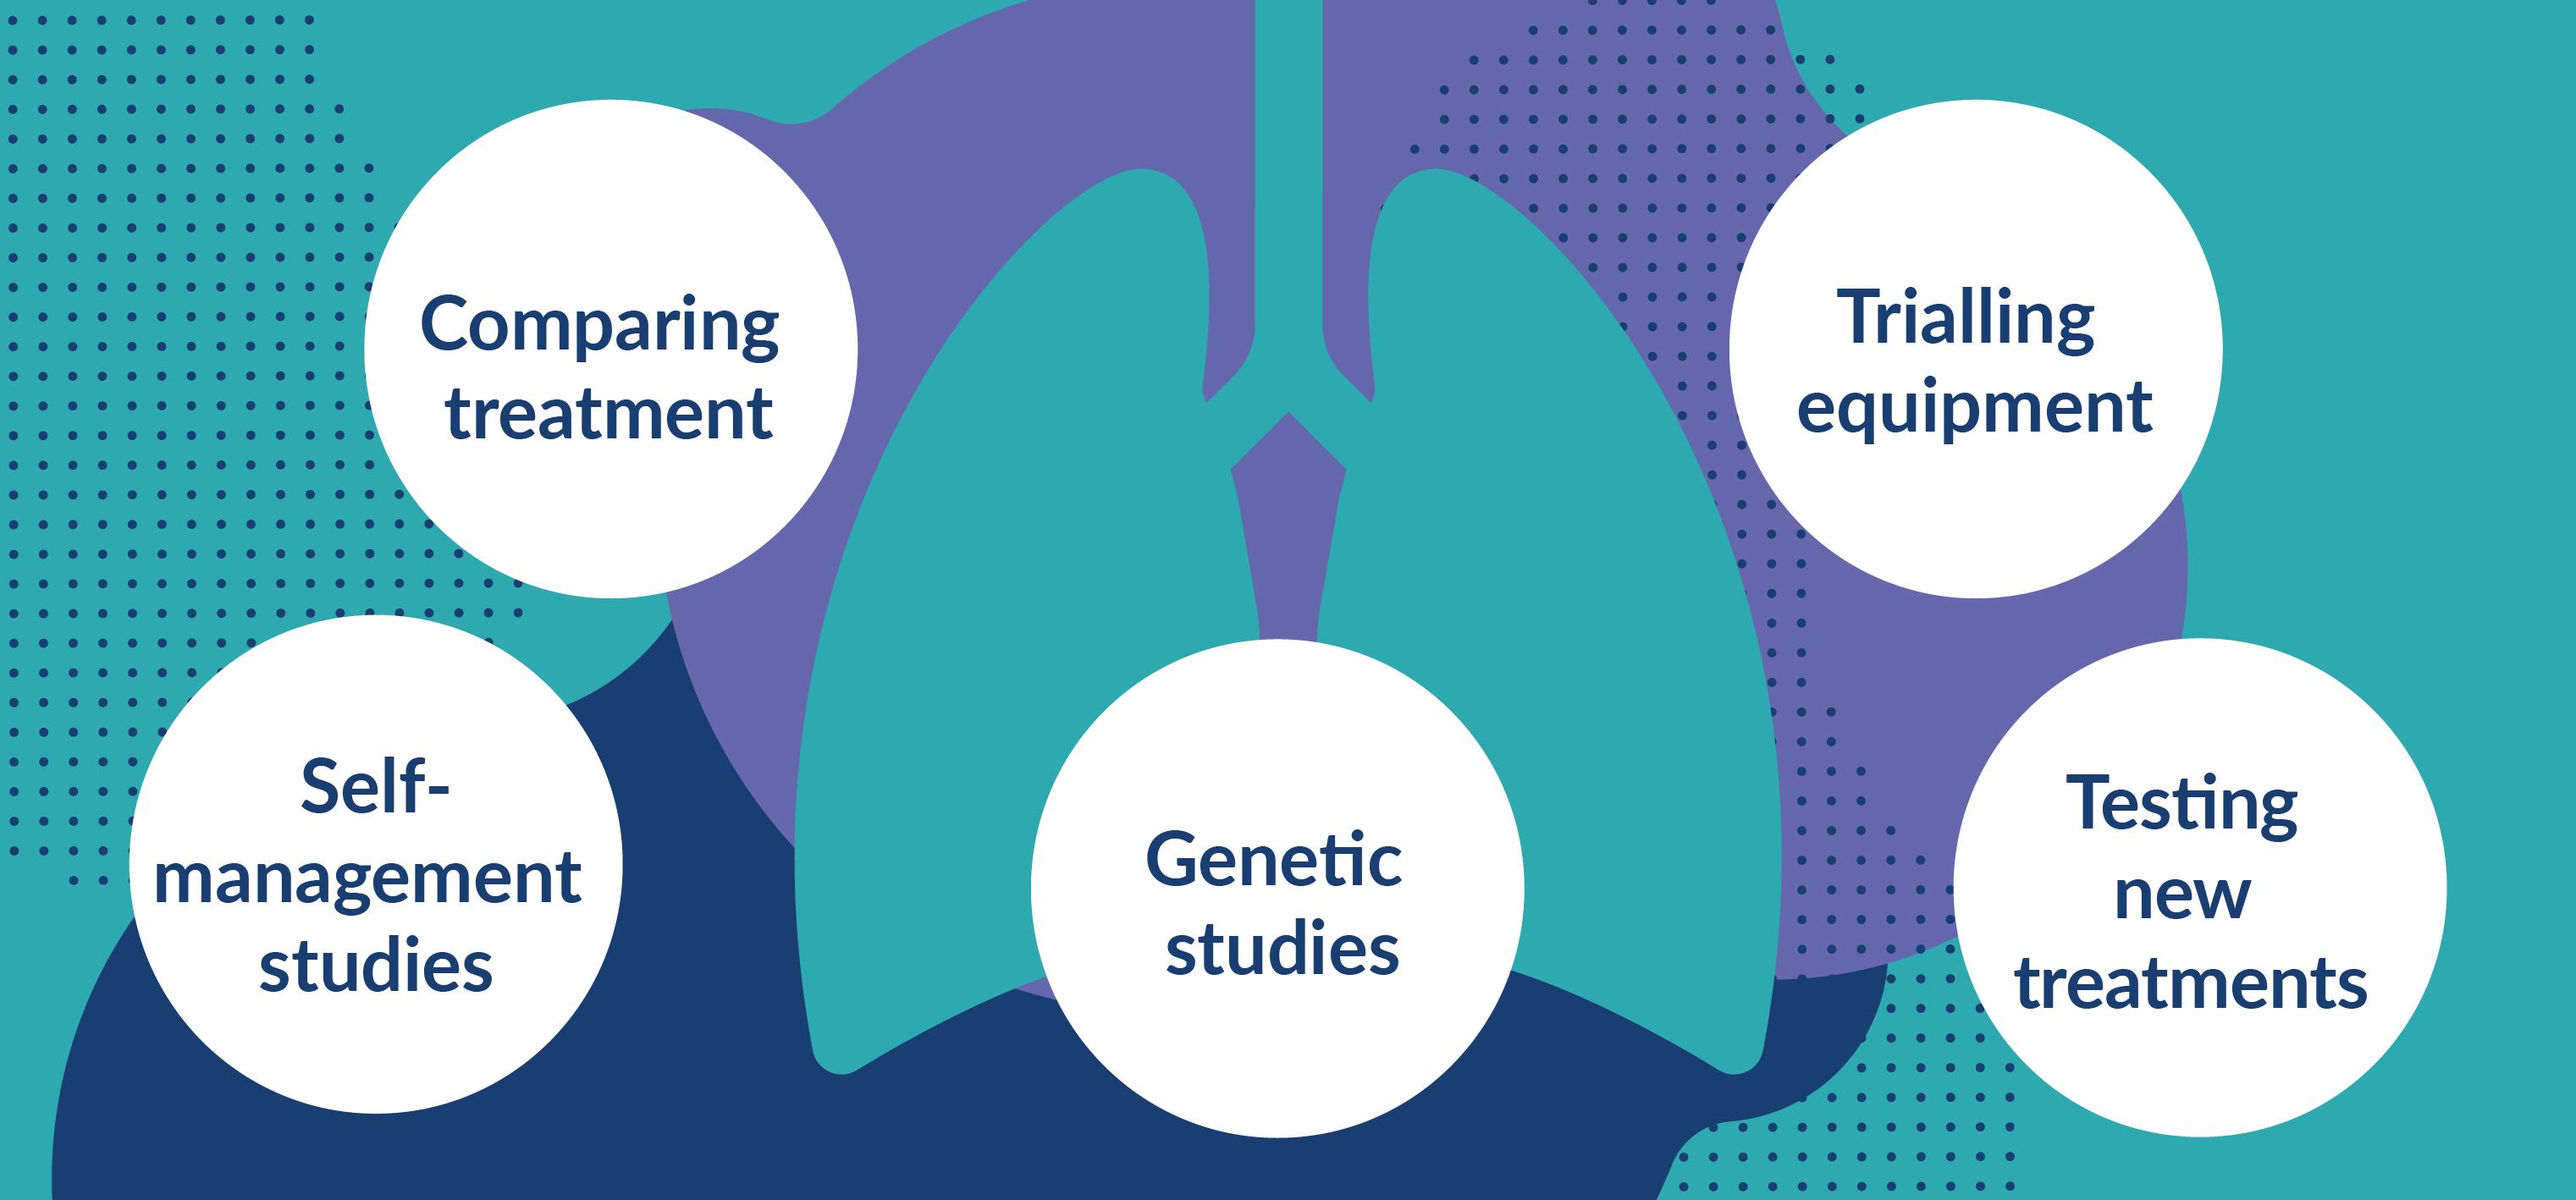 Lung illustration showing comparing treatment, self management, genetic studies, trialling equipment and testing new treatments